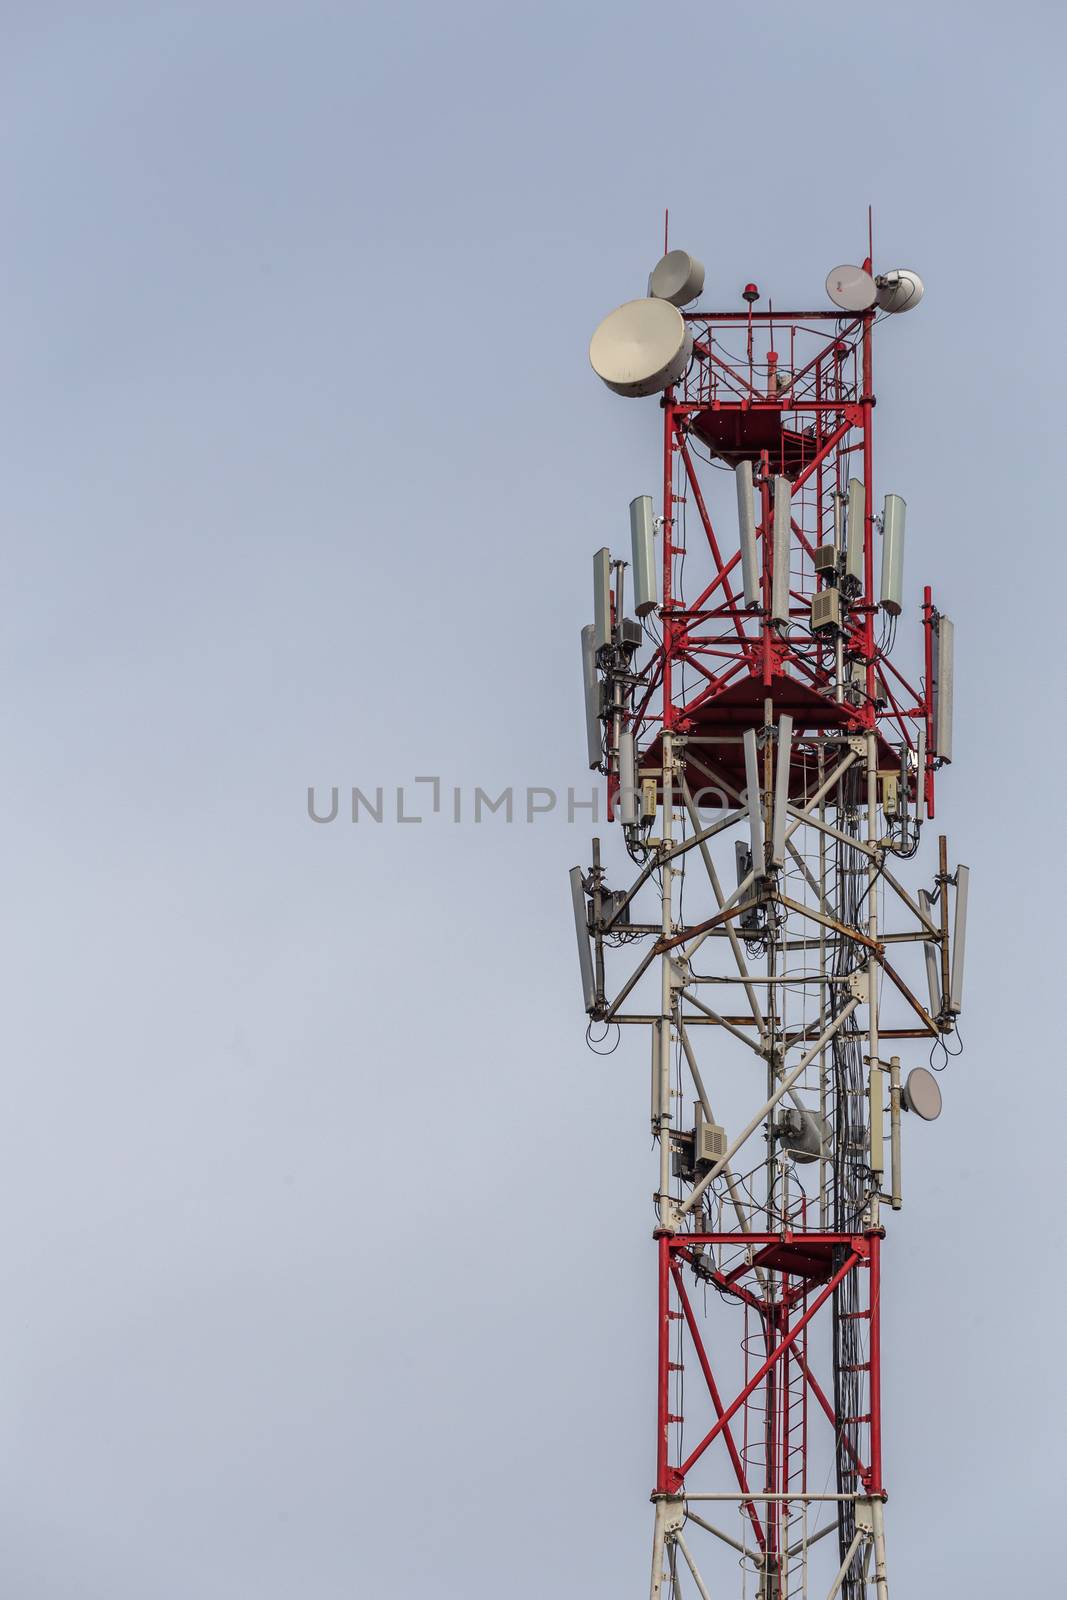 3G, 4G, 5G, wireless and cell phone telecommunication tower close-up on cloudy daylight sky background, vertical shot